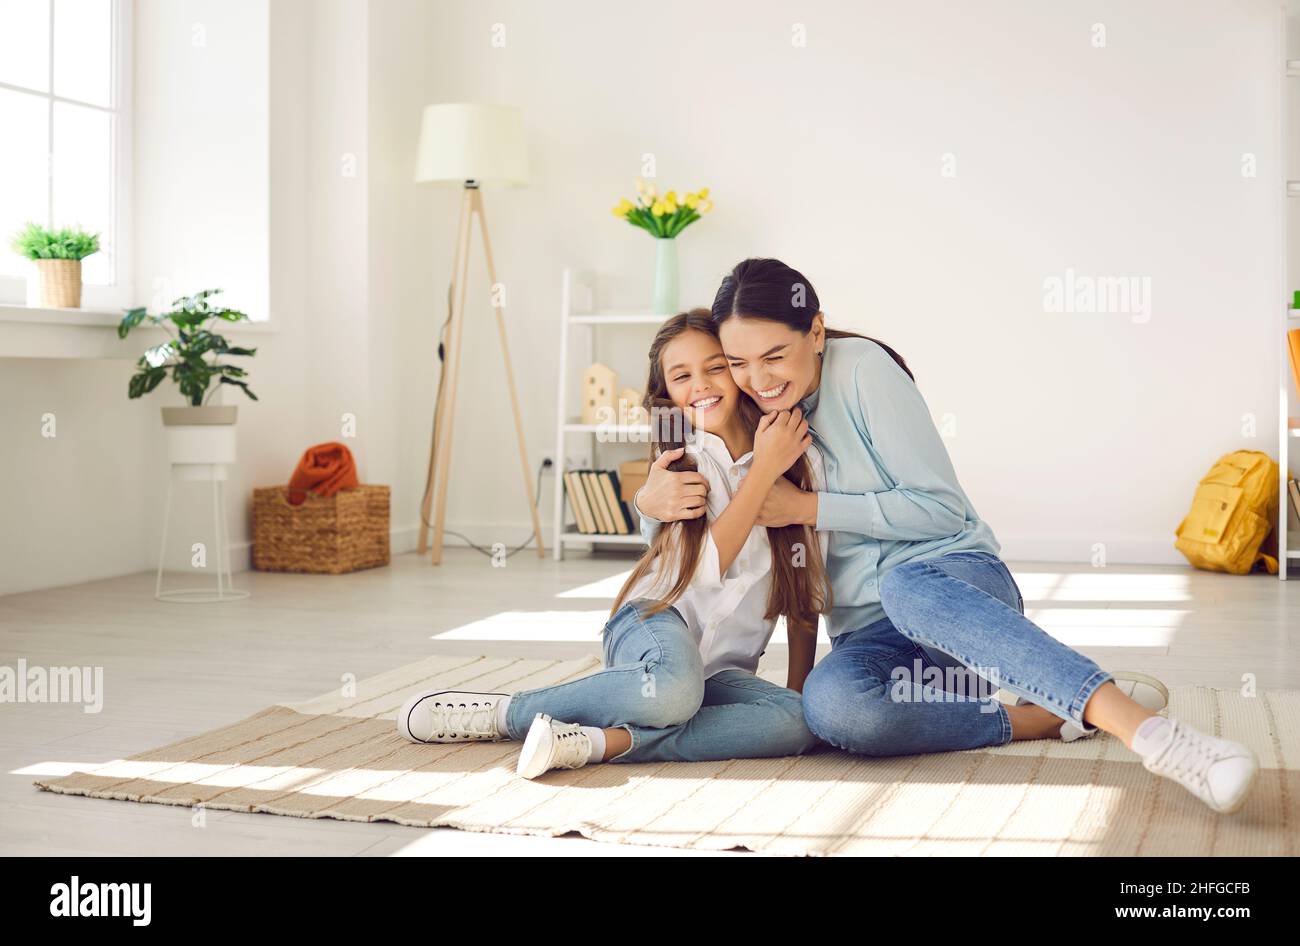 Smiling mother and small daughter have fun at home Stock Photo